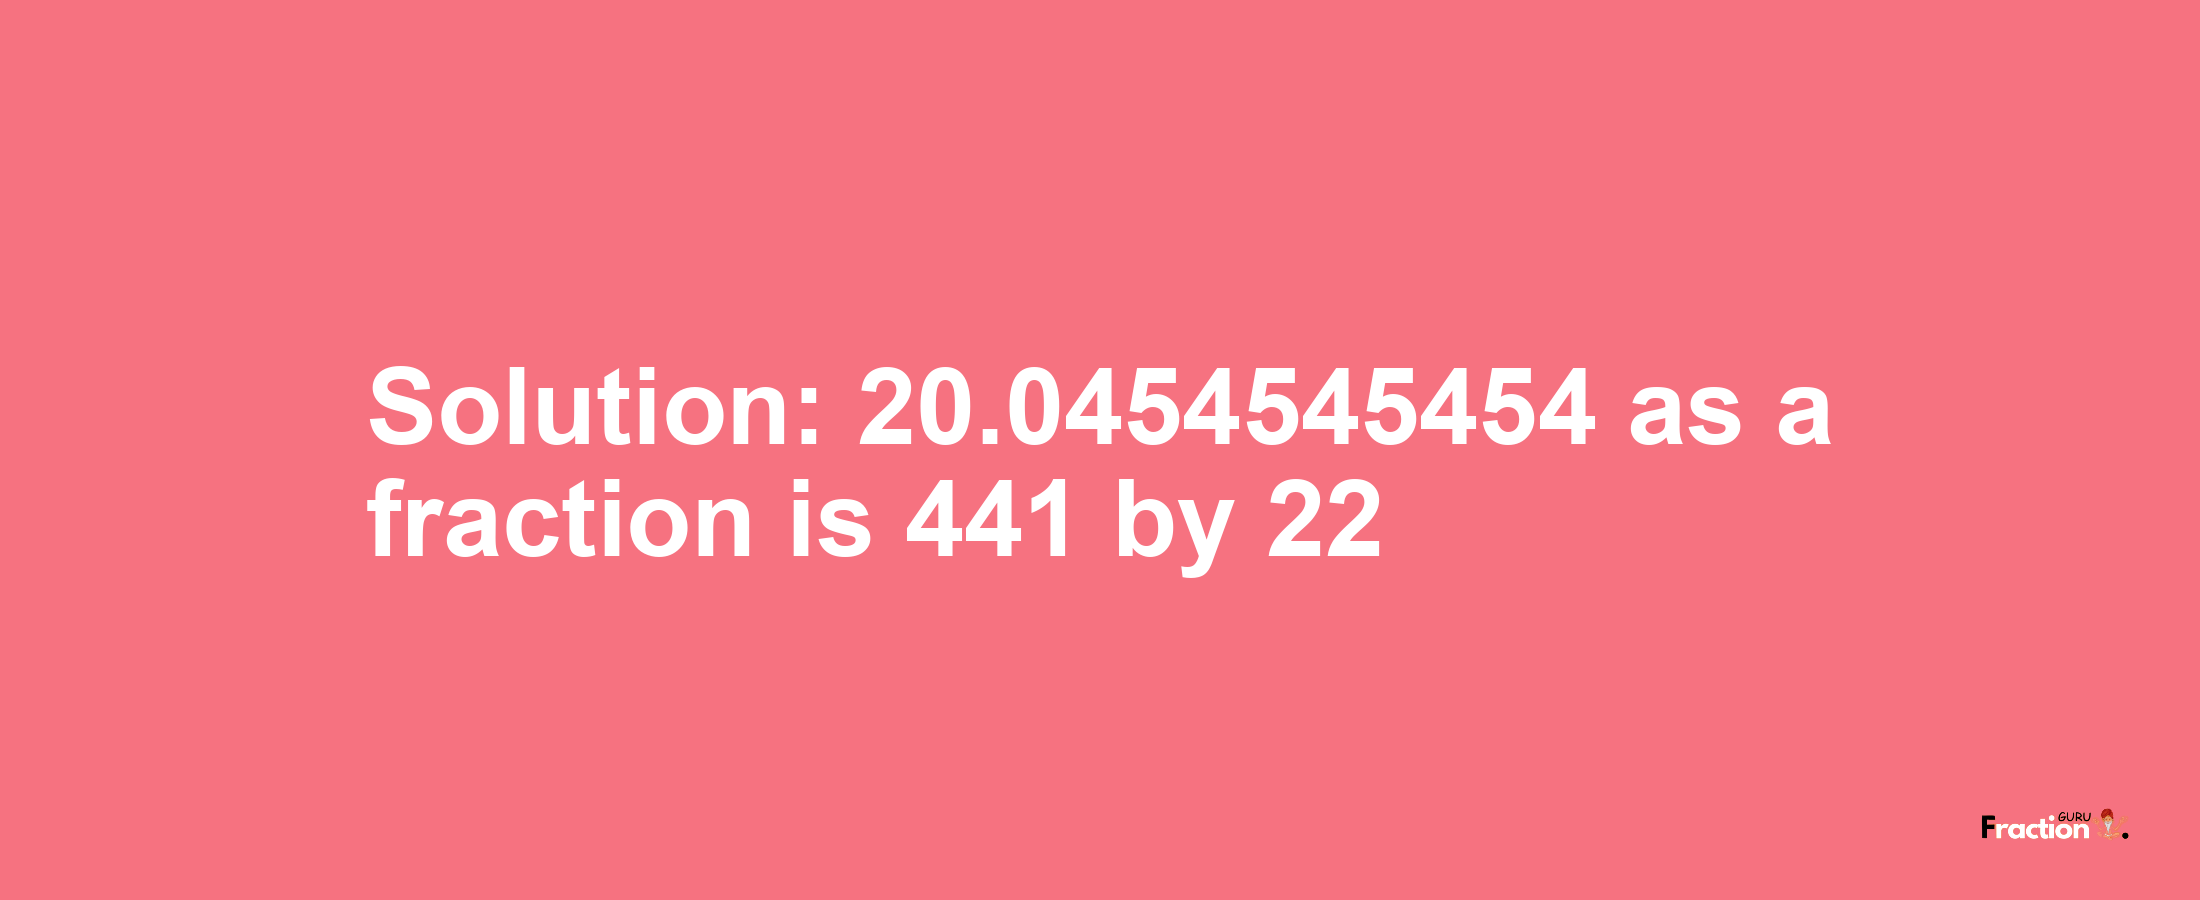 Solution:20.0454545454 as a fraction is 441/22